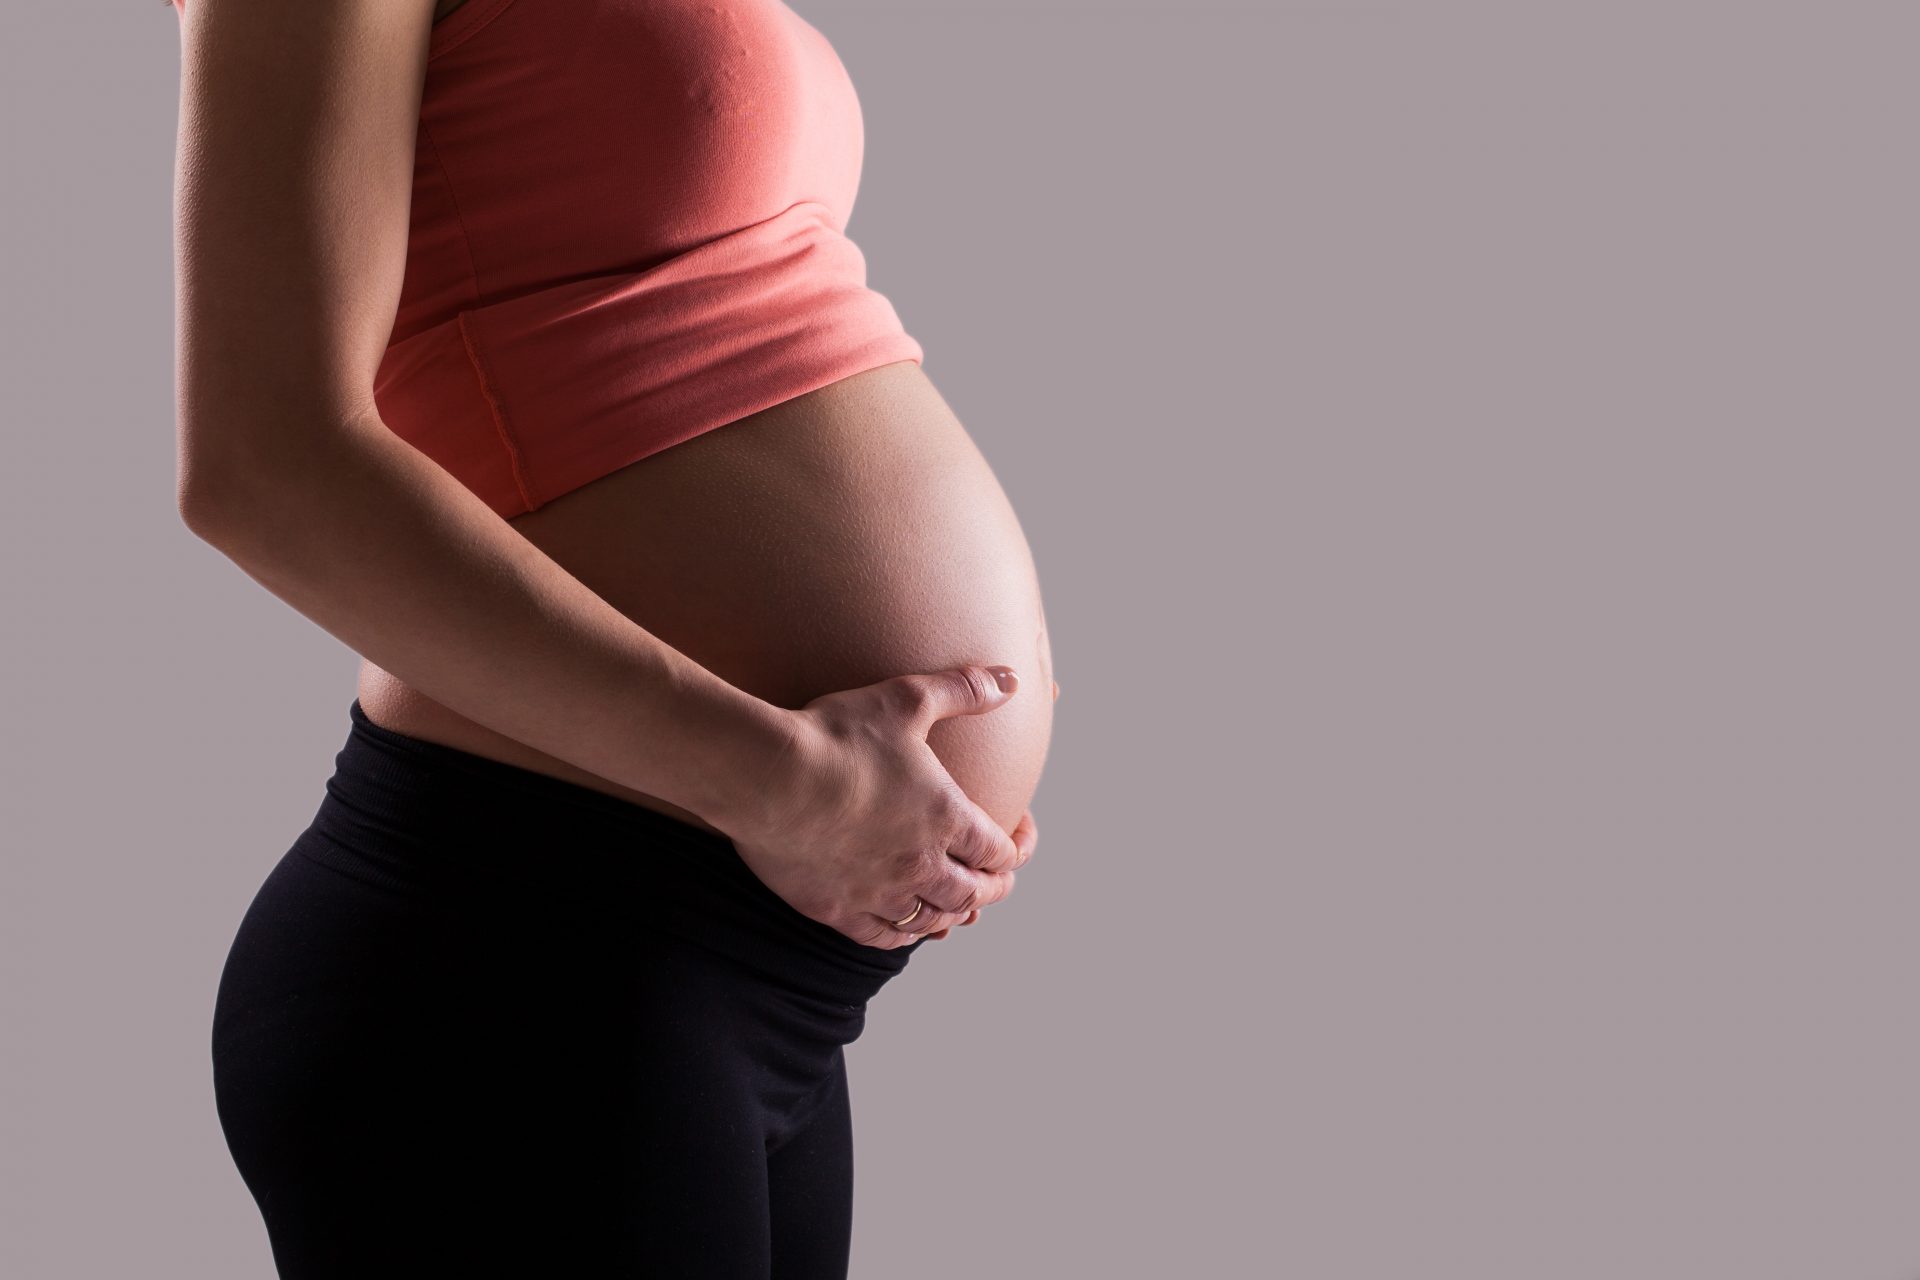 How Does Pregnancy Affect Your Teeth?